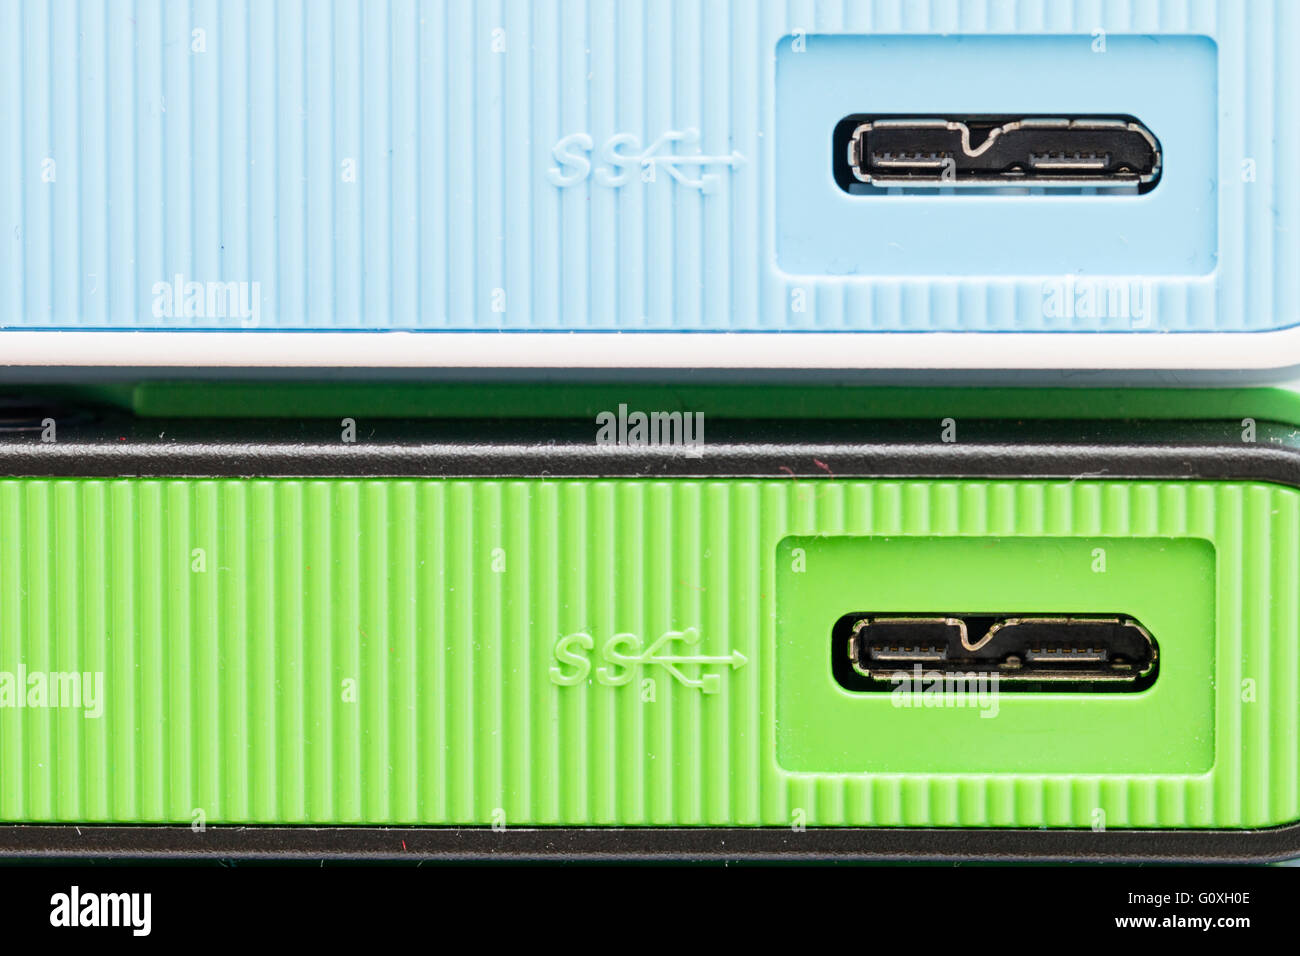 Two portable hard drives, one pale green, other pale blue, USB 3 connection socket. No brand name visible. Stock Photo